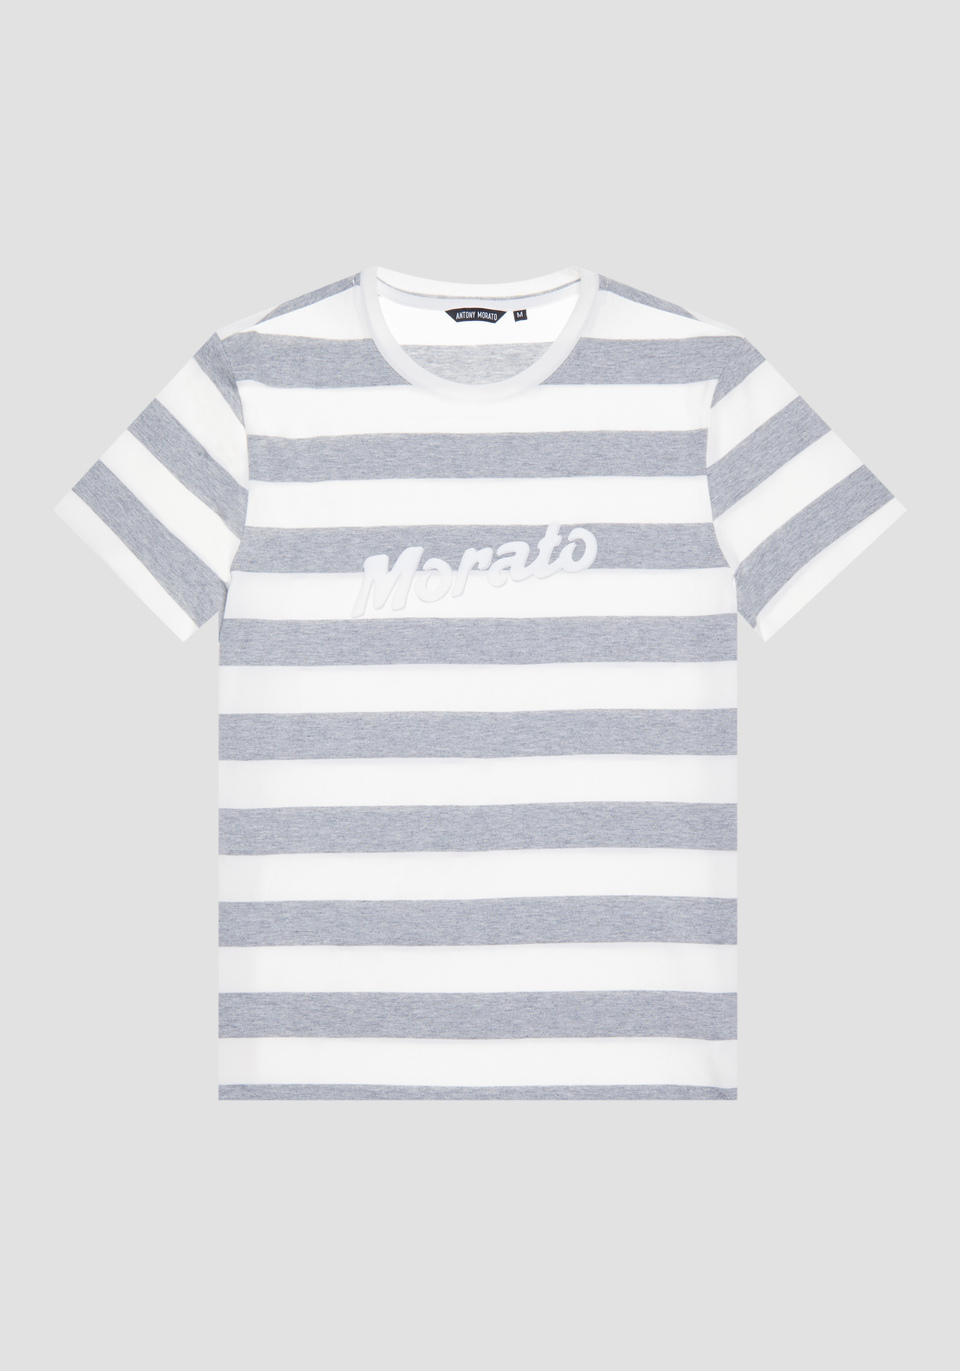 SLIM-FIT T-SHIRT IN COTTON WITH HORIZONTAL MÉLANGE STRIPES AND "MORATO" PRINT - Antony Morato Online Shop